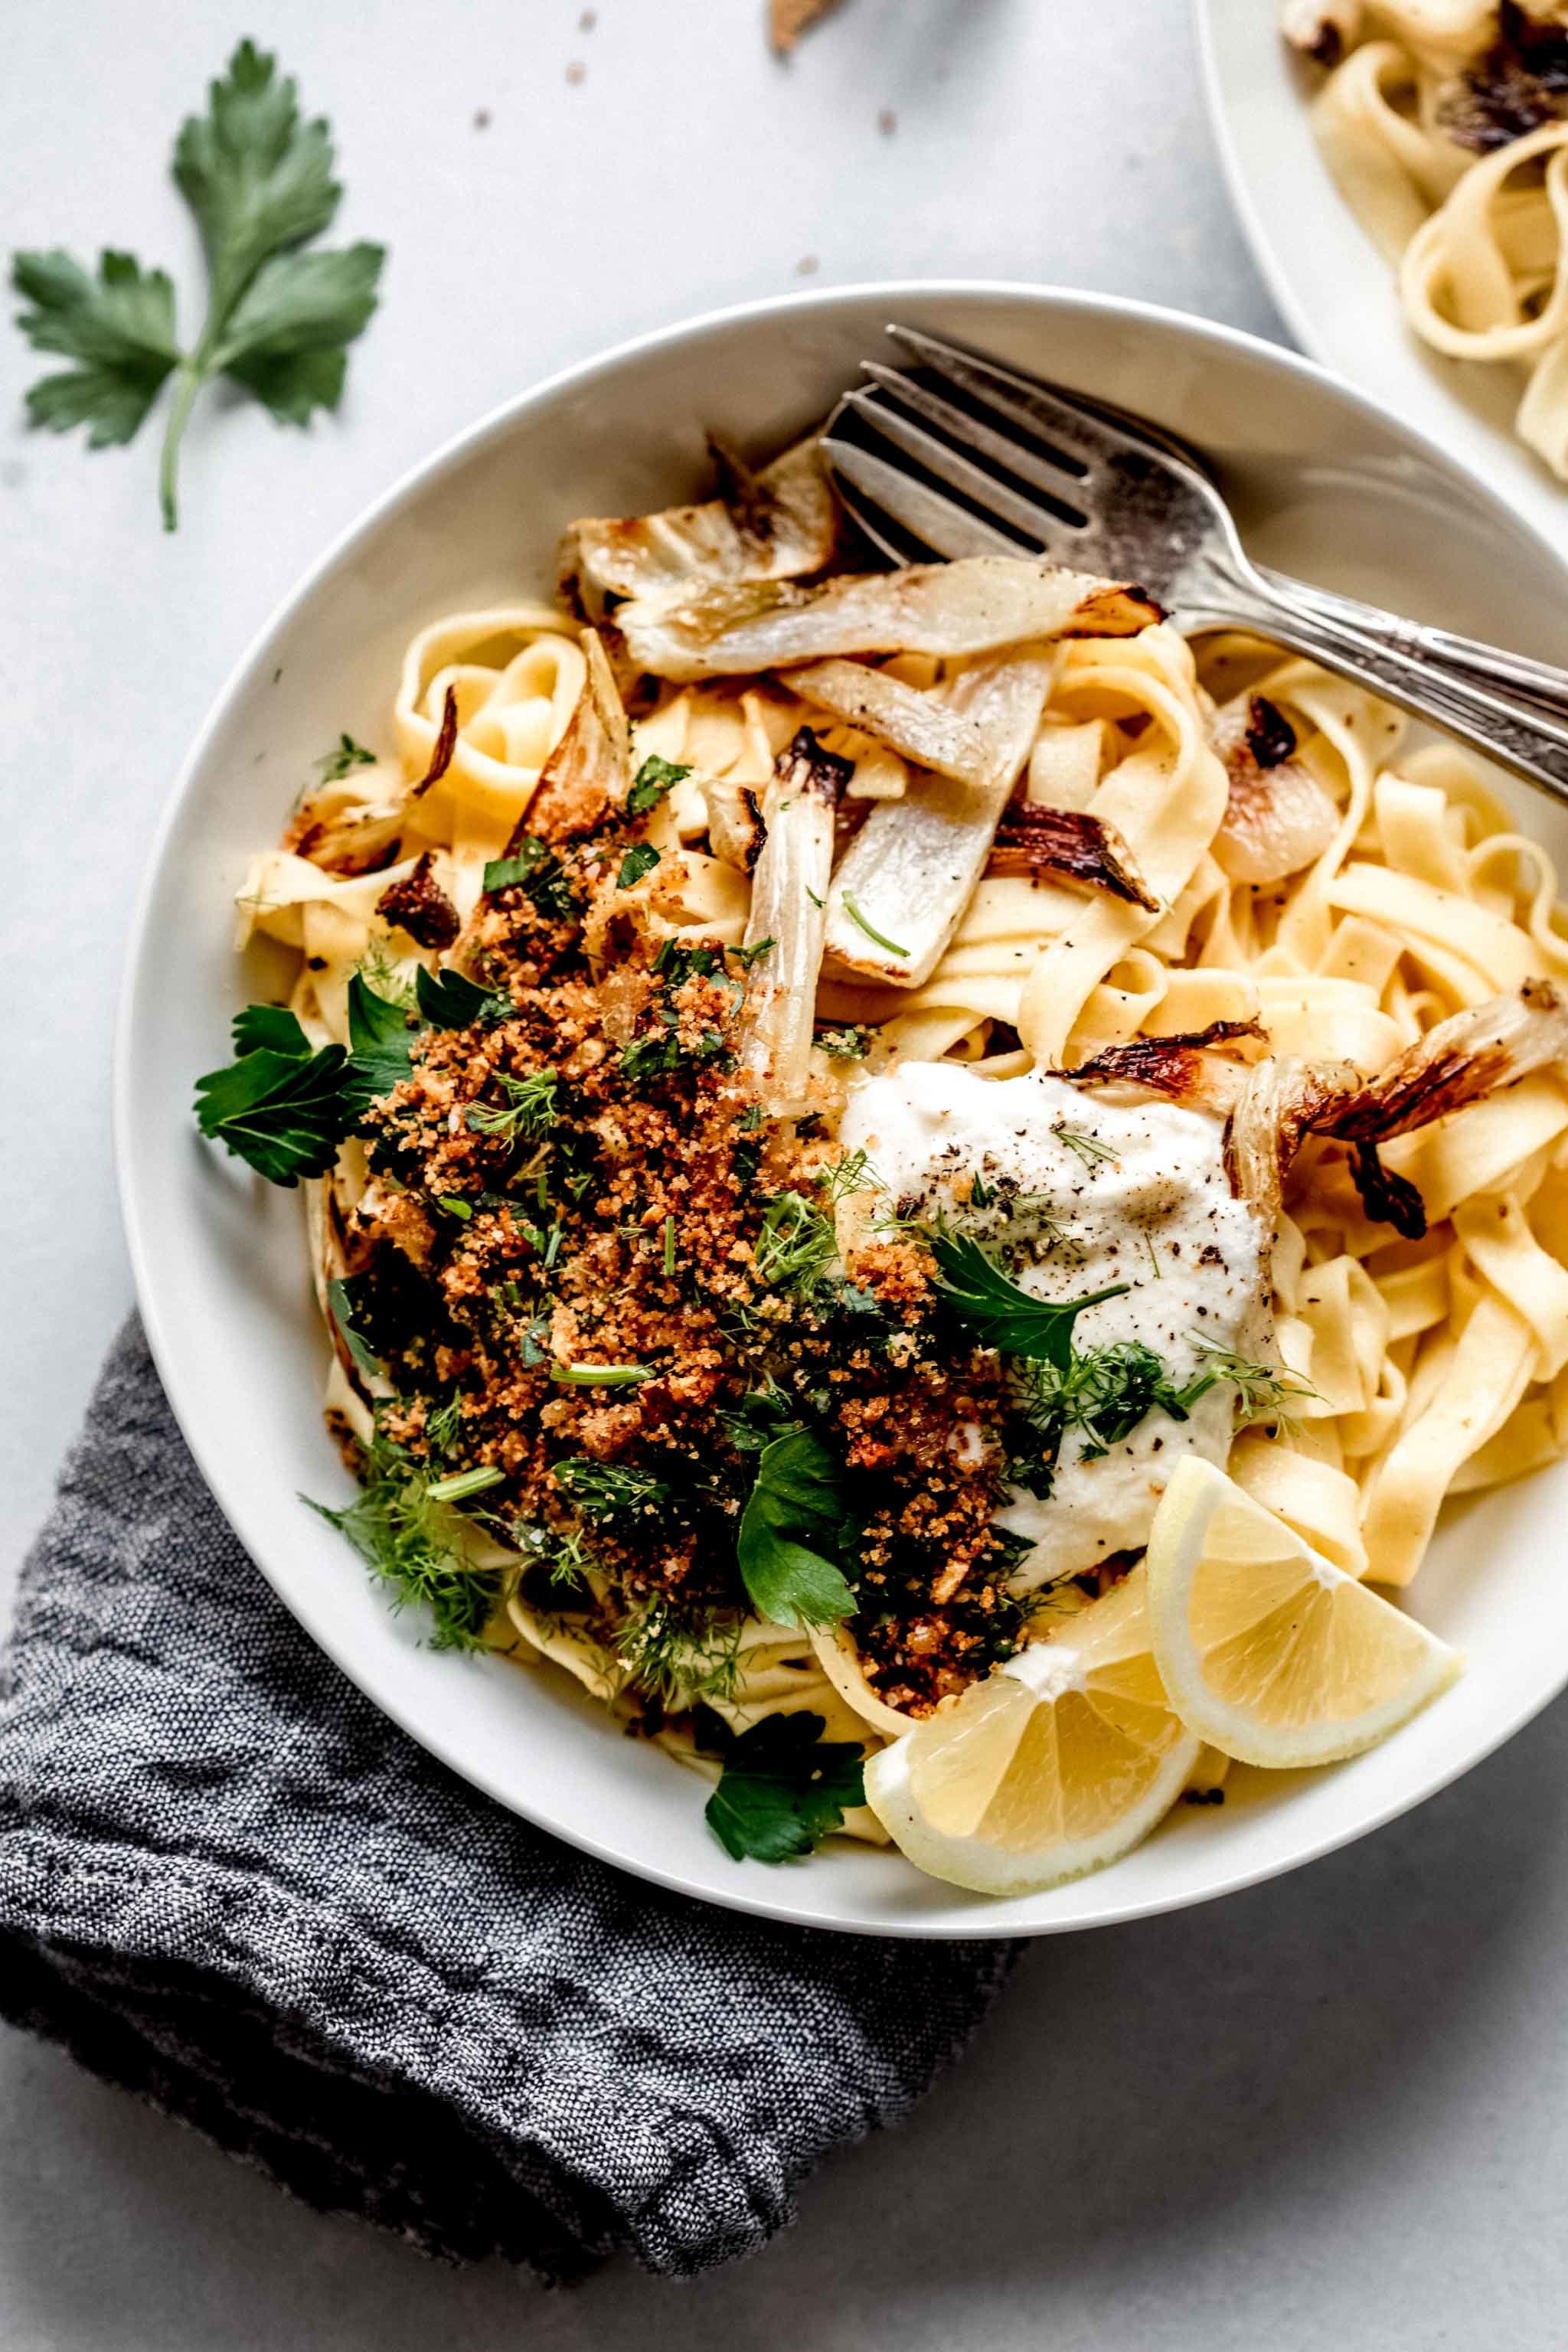 Linguine with ricotta and fennel.